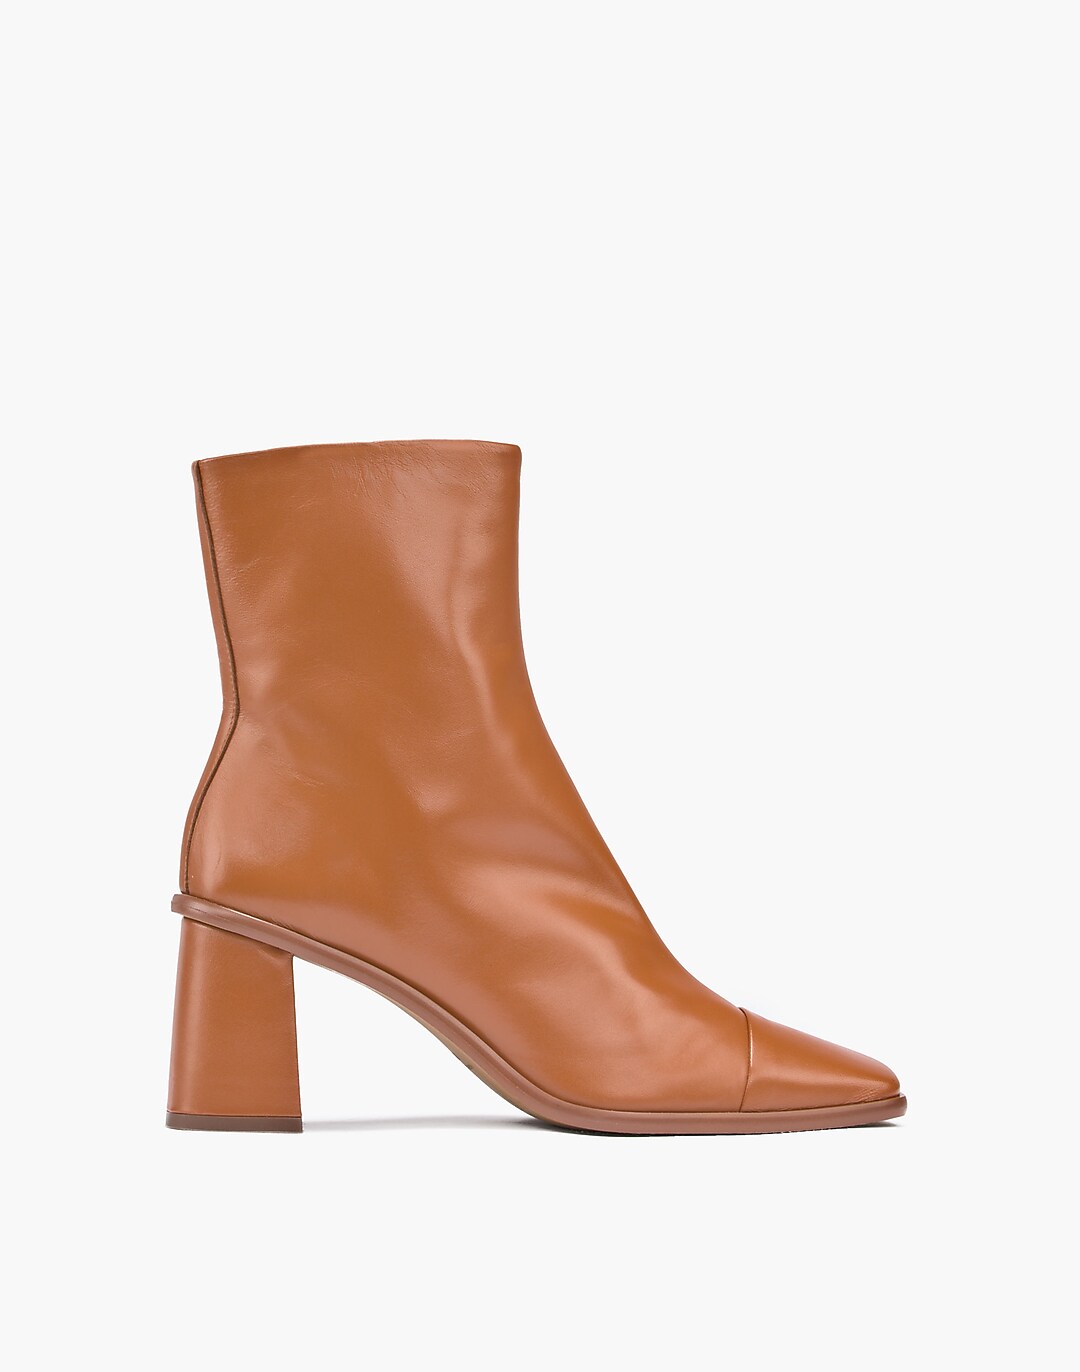 Maguire Leather Avila Ankle Boots | Madewell